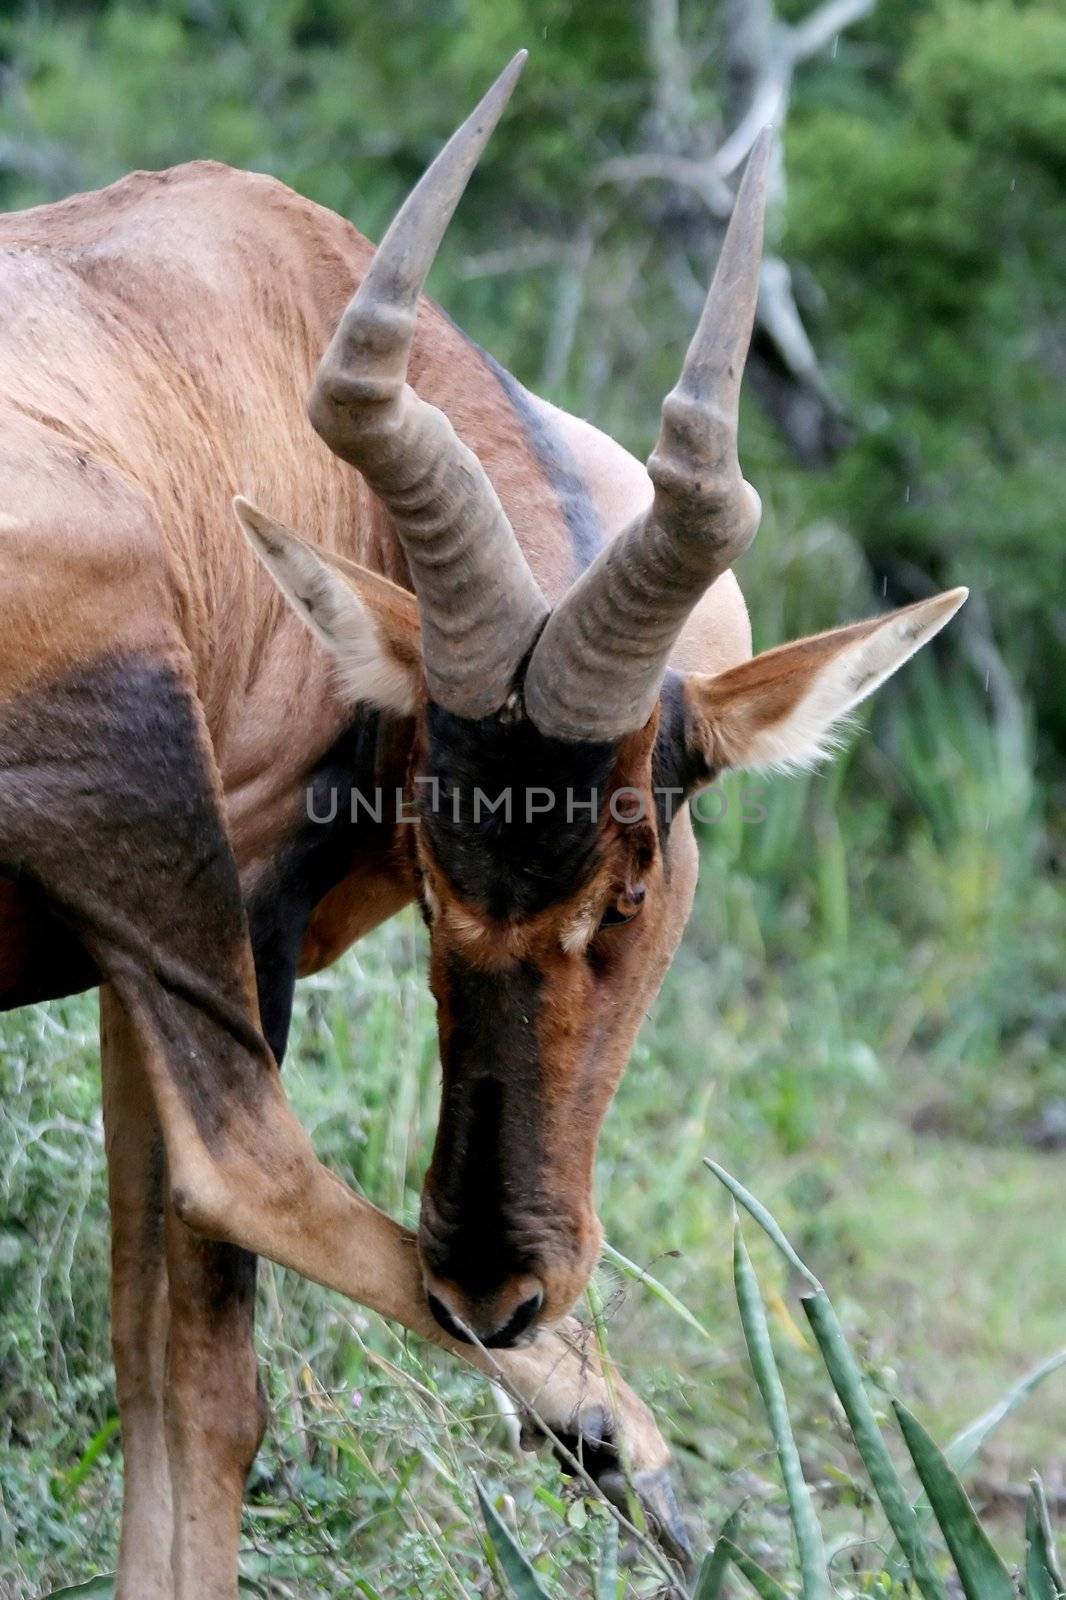 Red Hartebeest antelope from Africa scratching it's leg